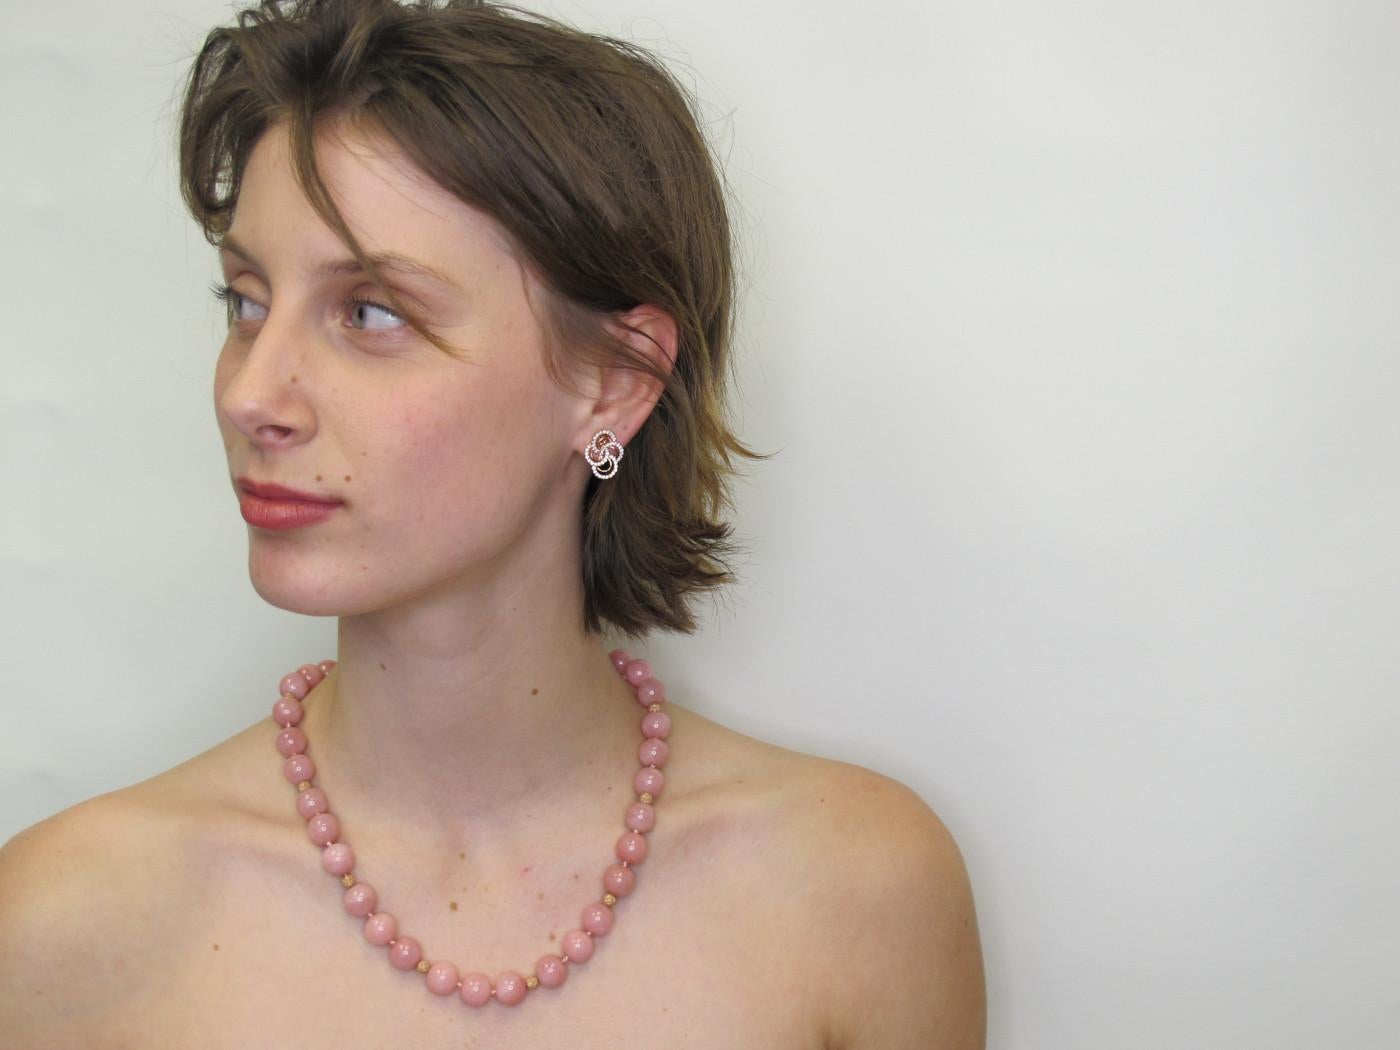 This unusual beaded necklace features large, 12mm round pink Peruvian opals beads in a lovely shade of peony pink! The opals have been hand strung with 14k rose gold accents and will make a unique and flattering  addition to your jewelry collection!